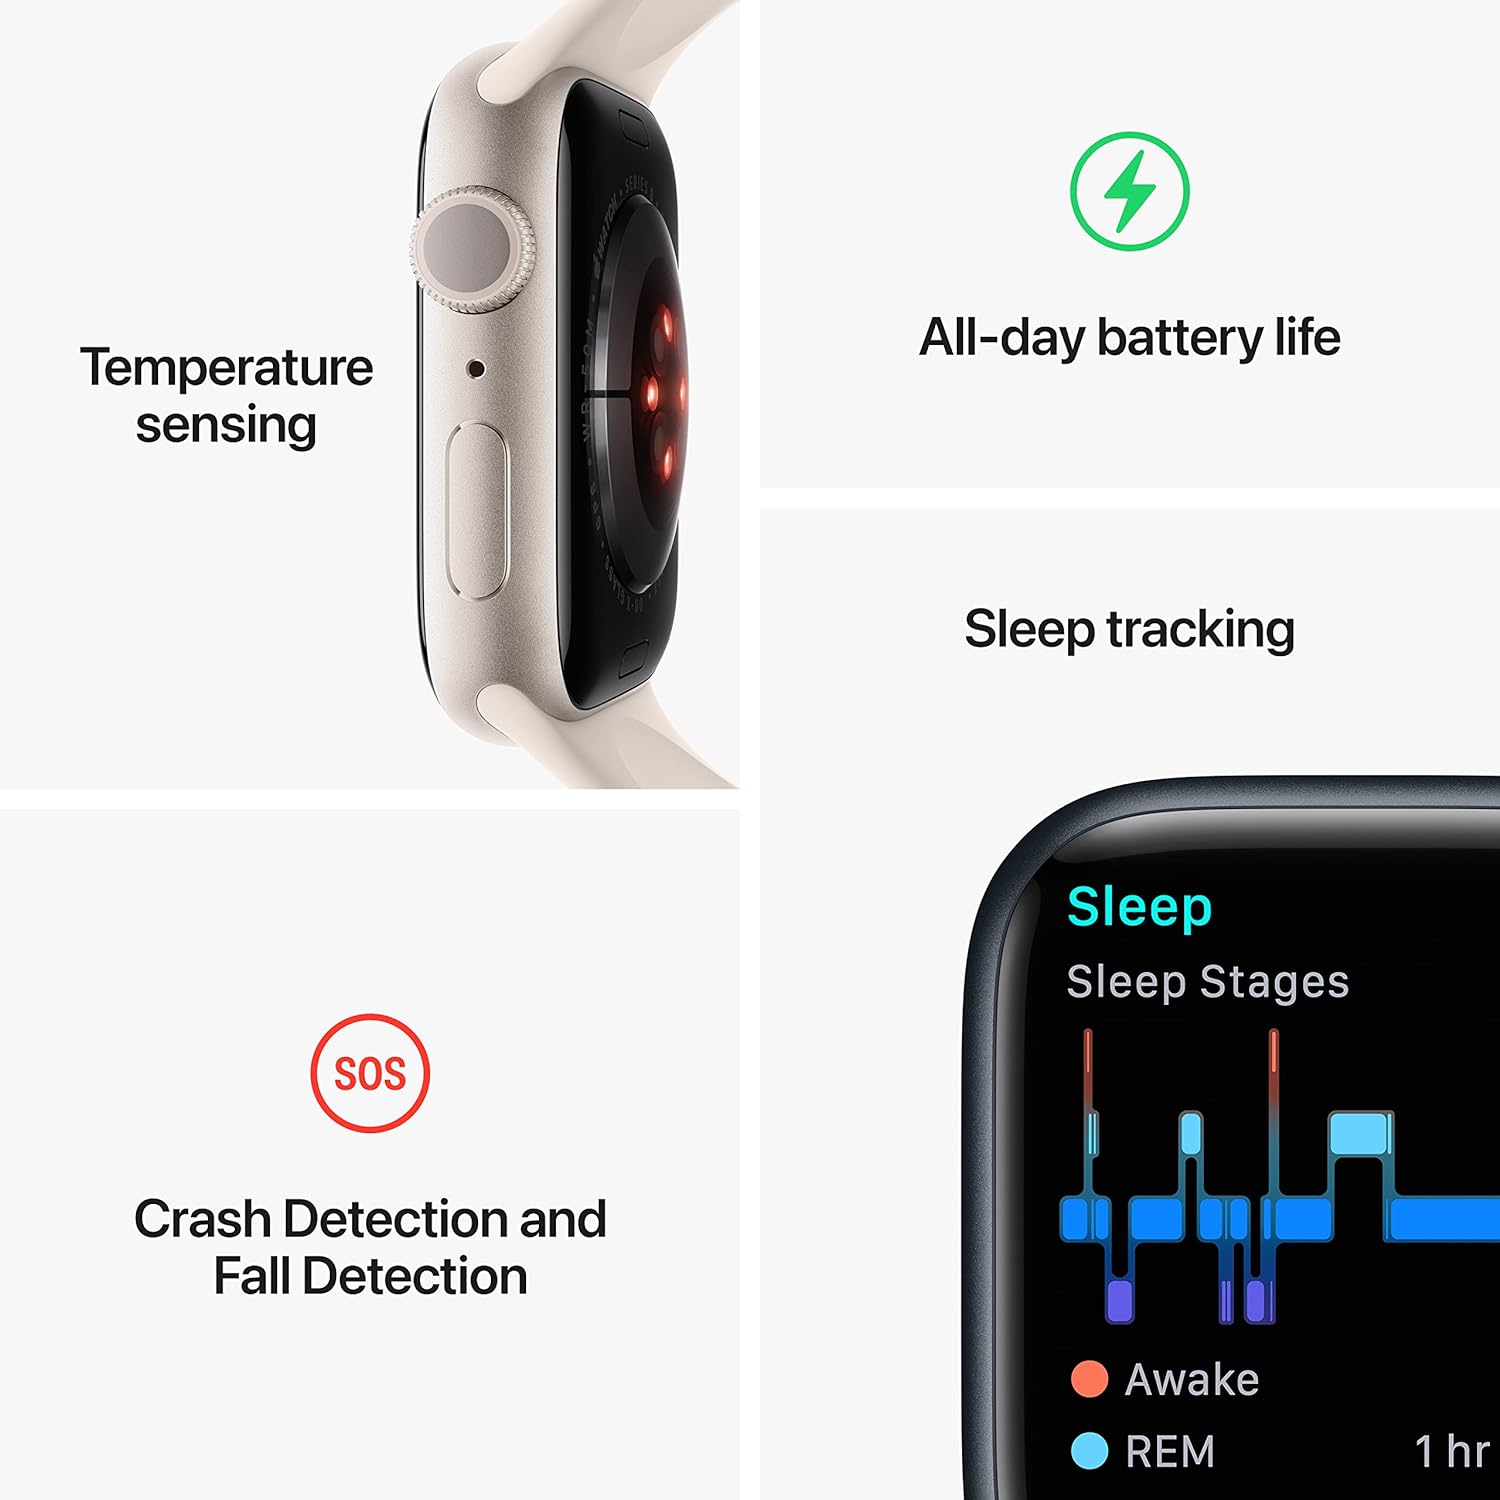 Innovative safety features in the Apple Watch Series 8 - (PRODUCT)RED 0194253150503